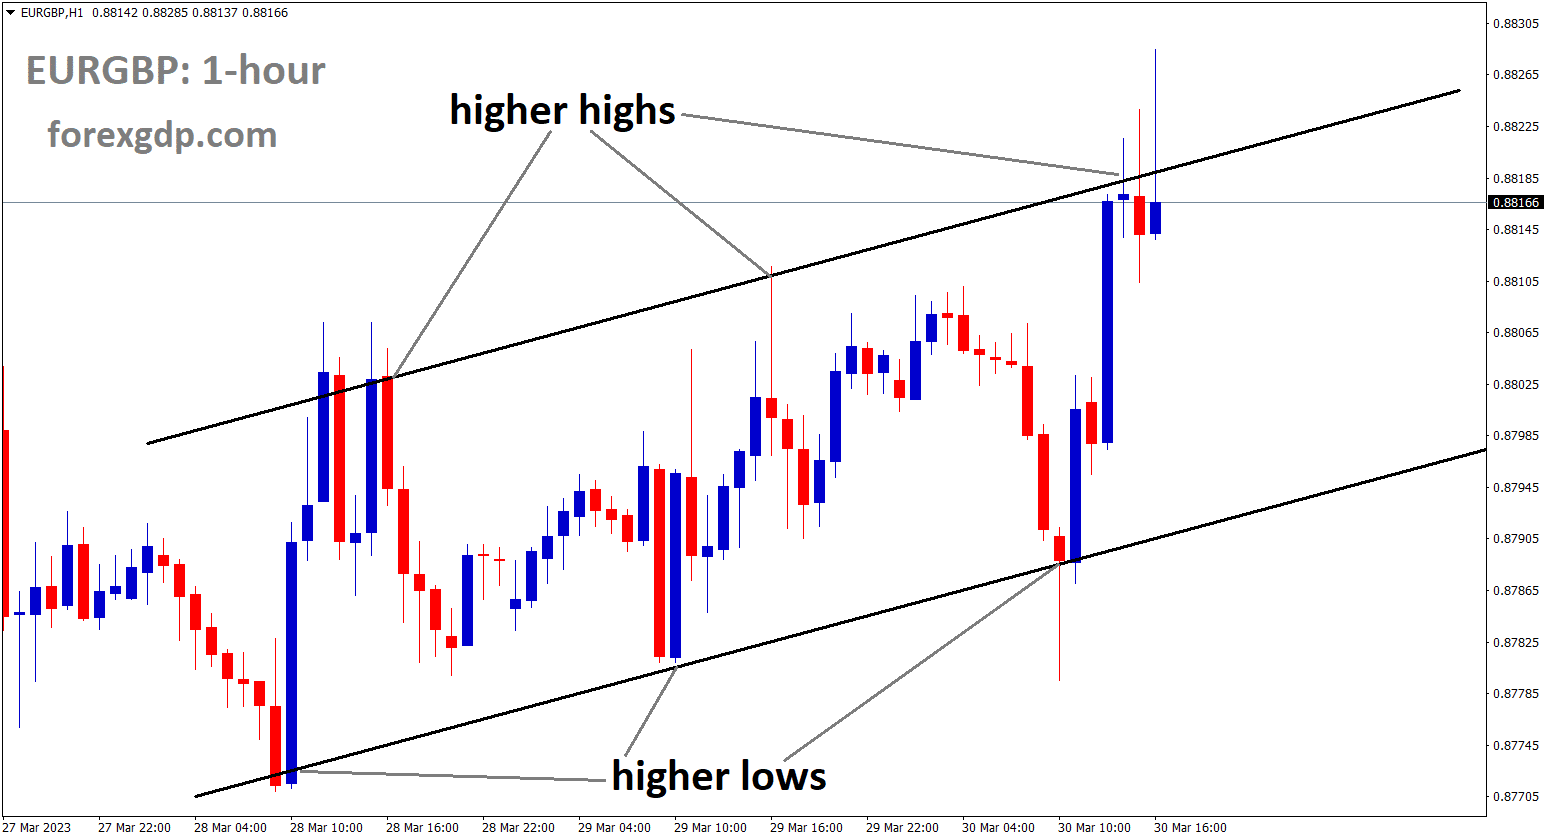 EURGBP is moving an Ascending Channel and the market has reached the higher high area of the channel.